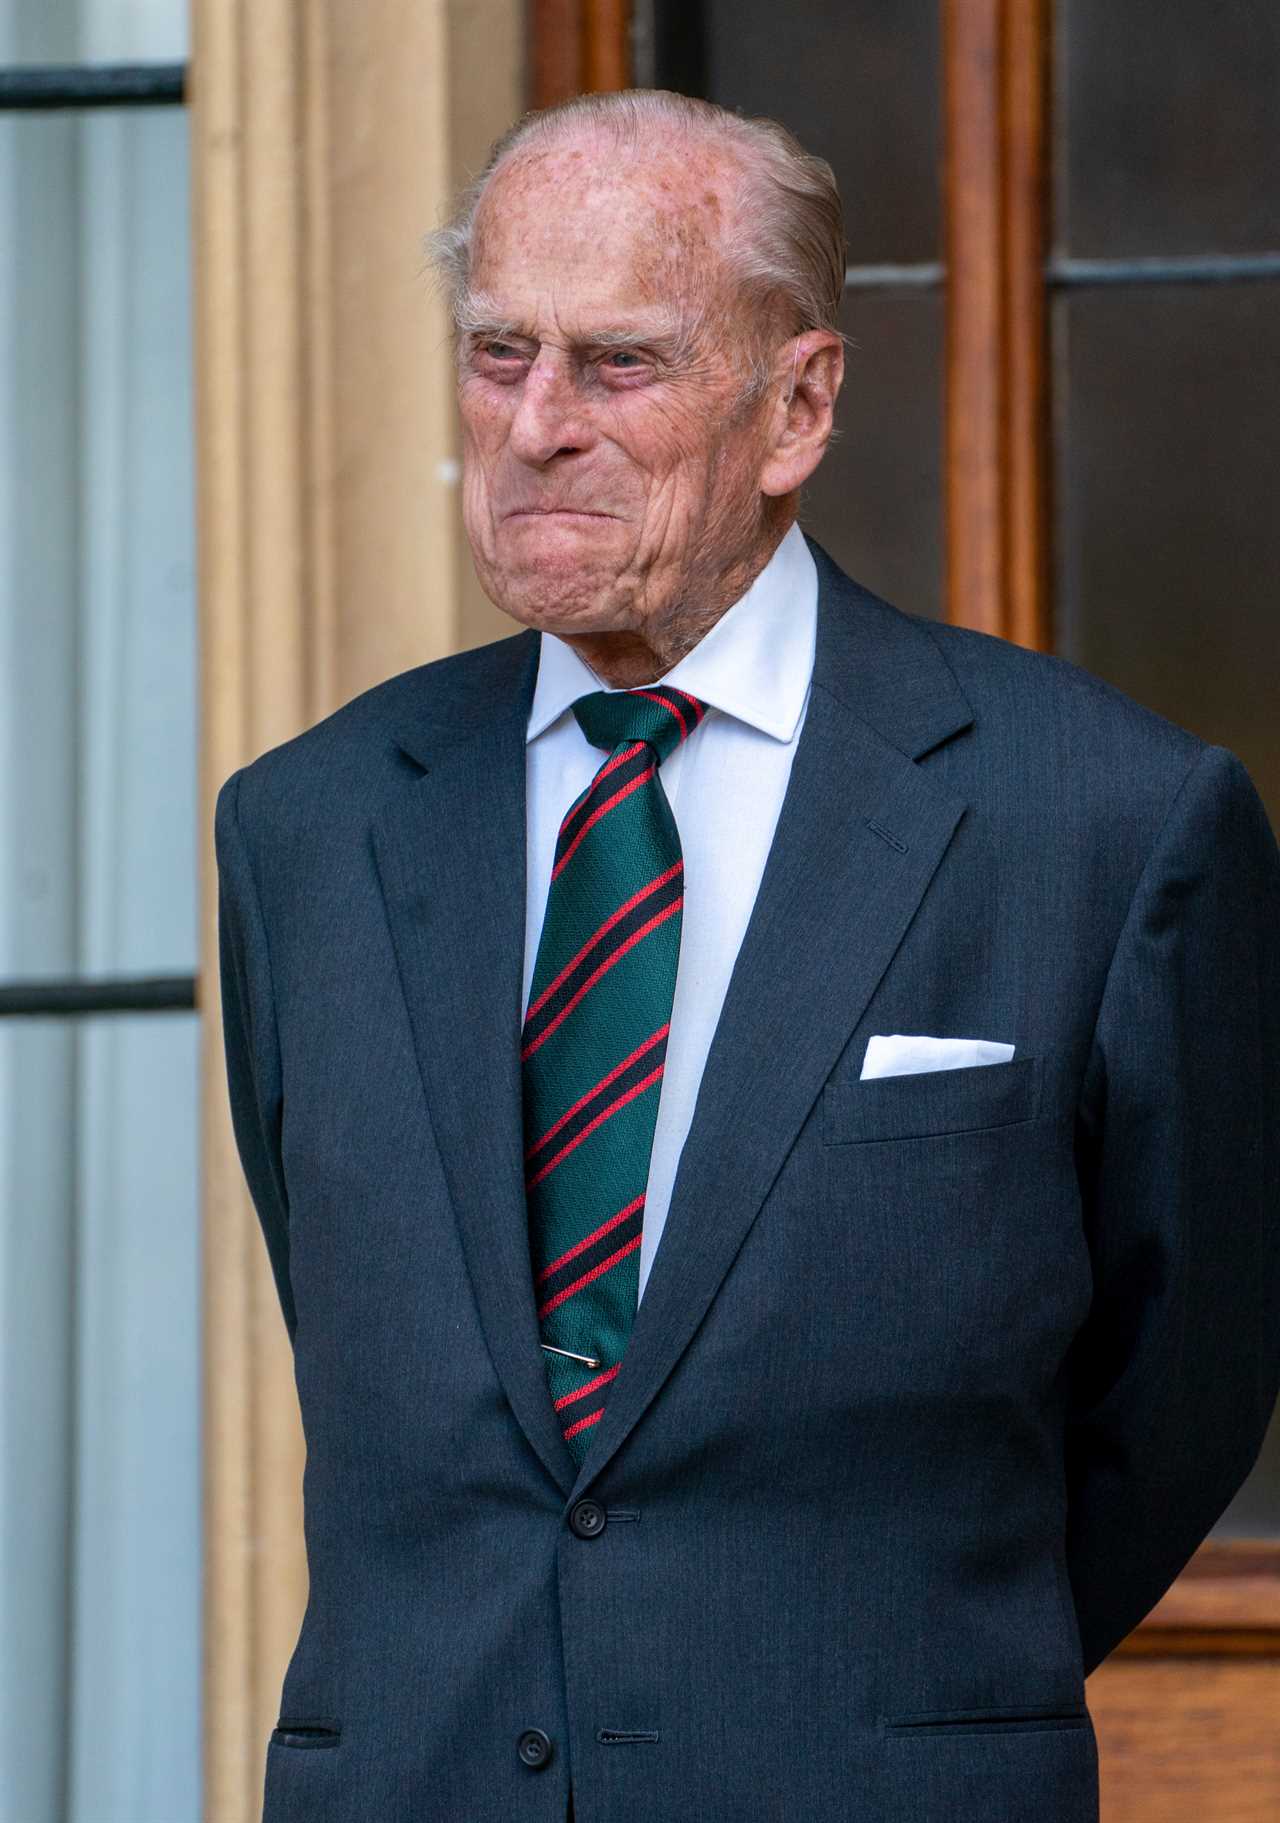 Prince Philip switched off EastEnders because he couldn’t understand the Cockney accent